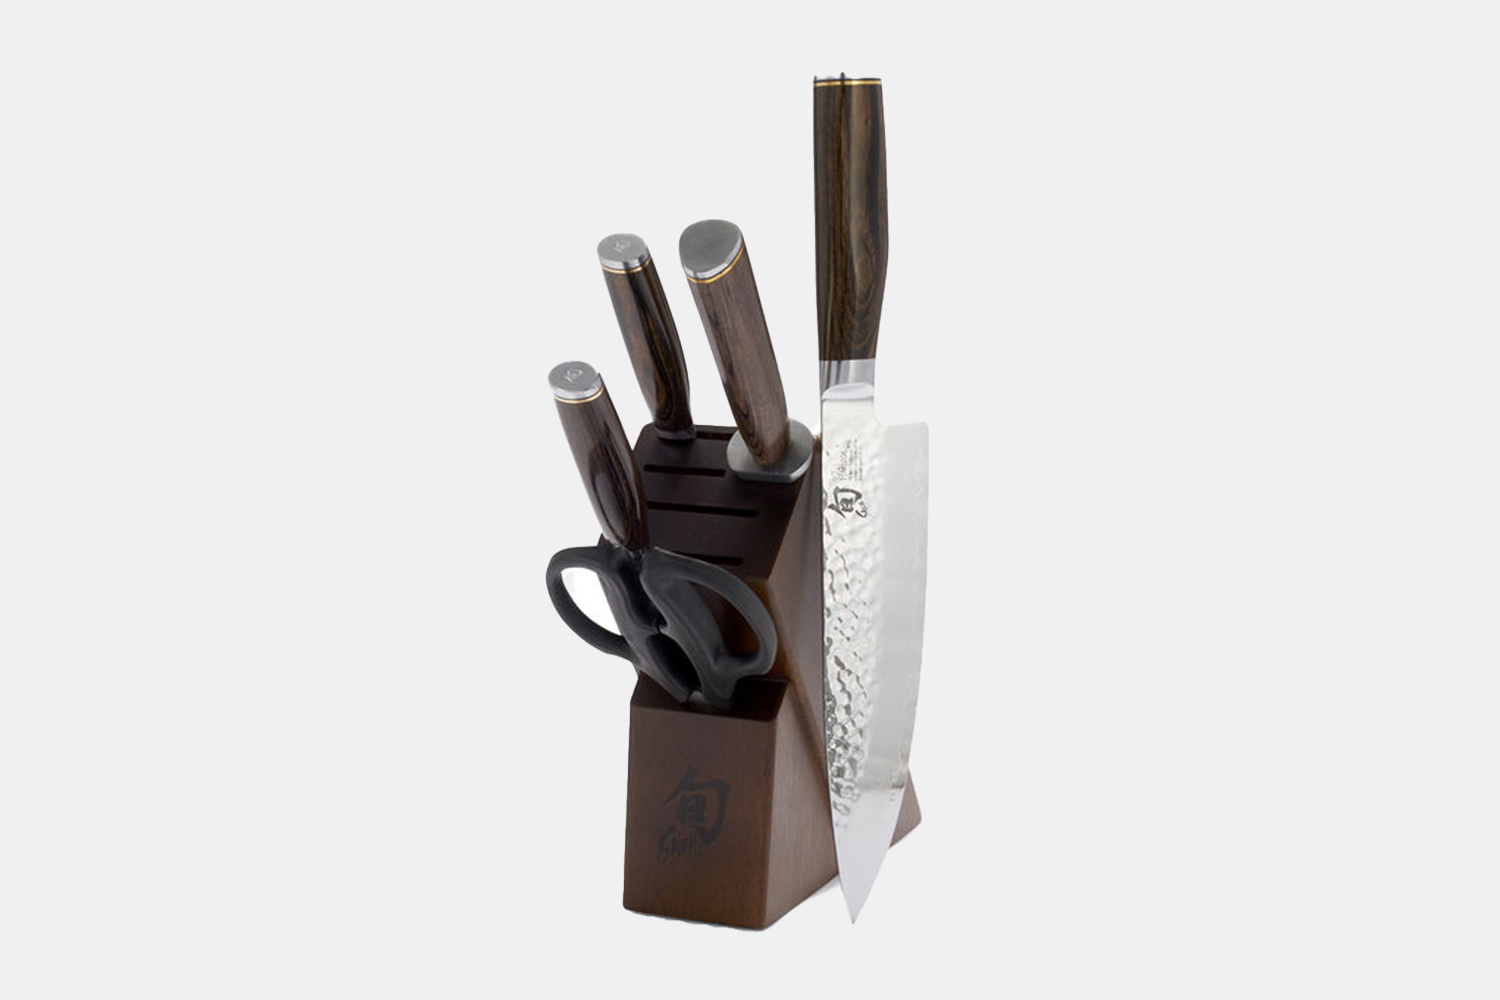 A knife set and knife block